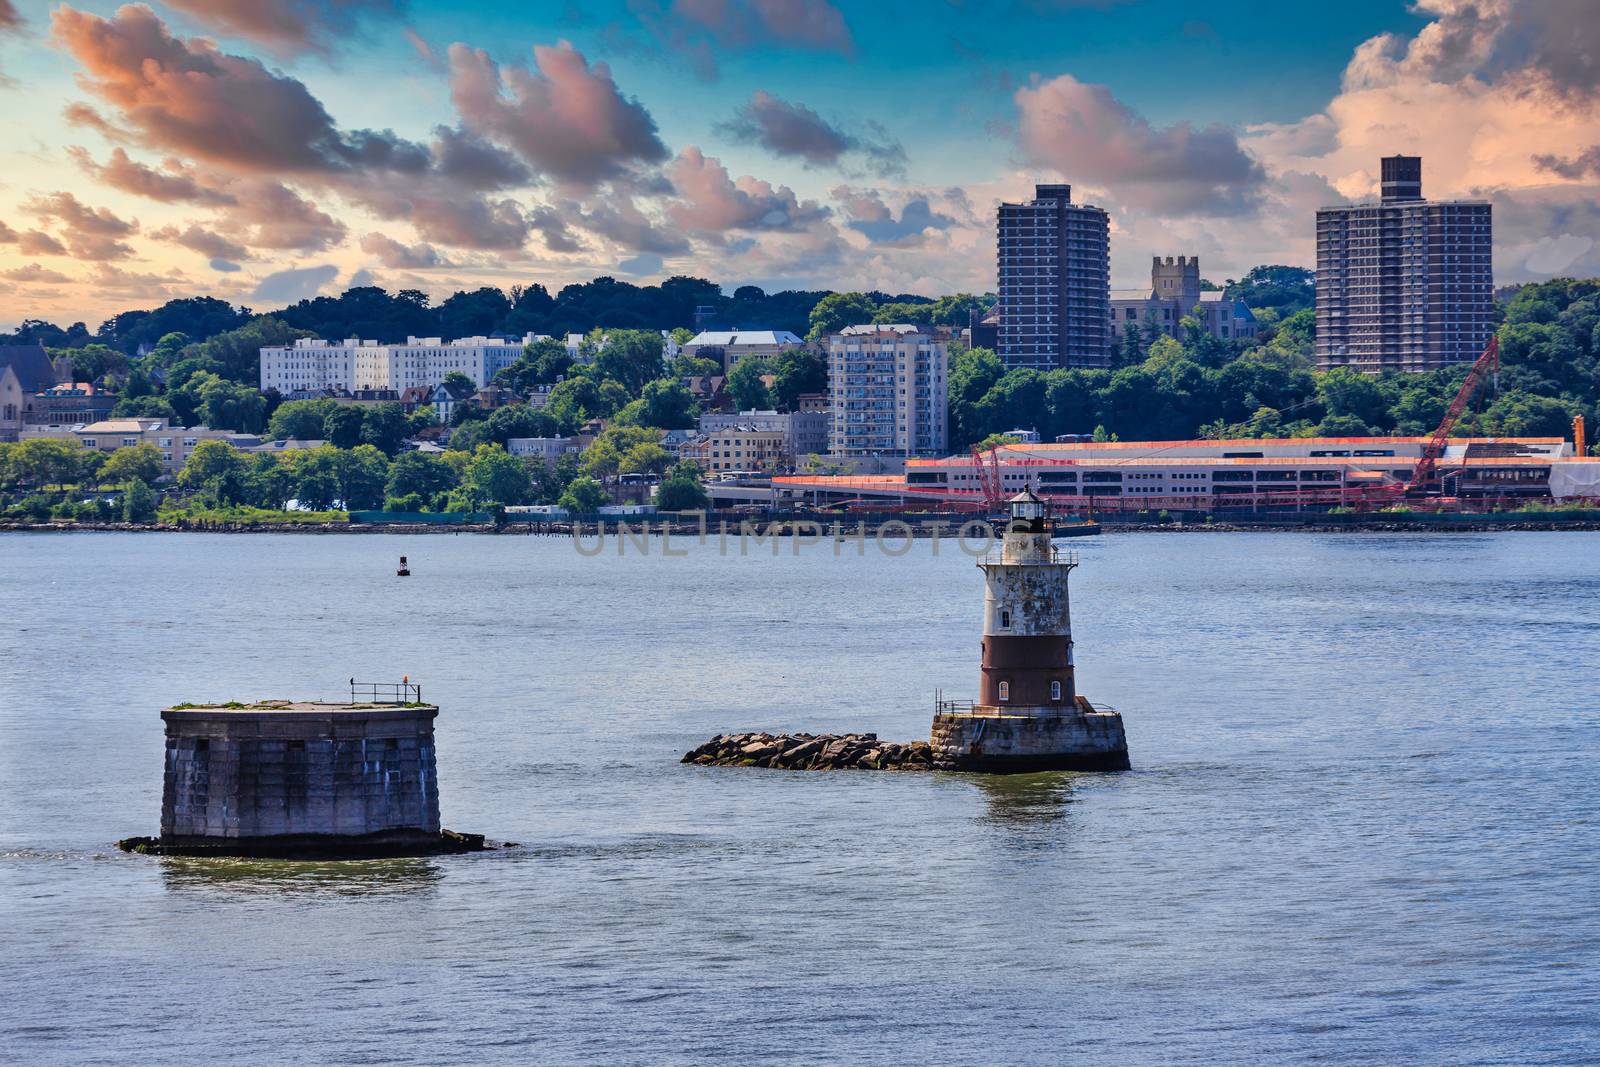 A Navigation Beacon in New York Harbor